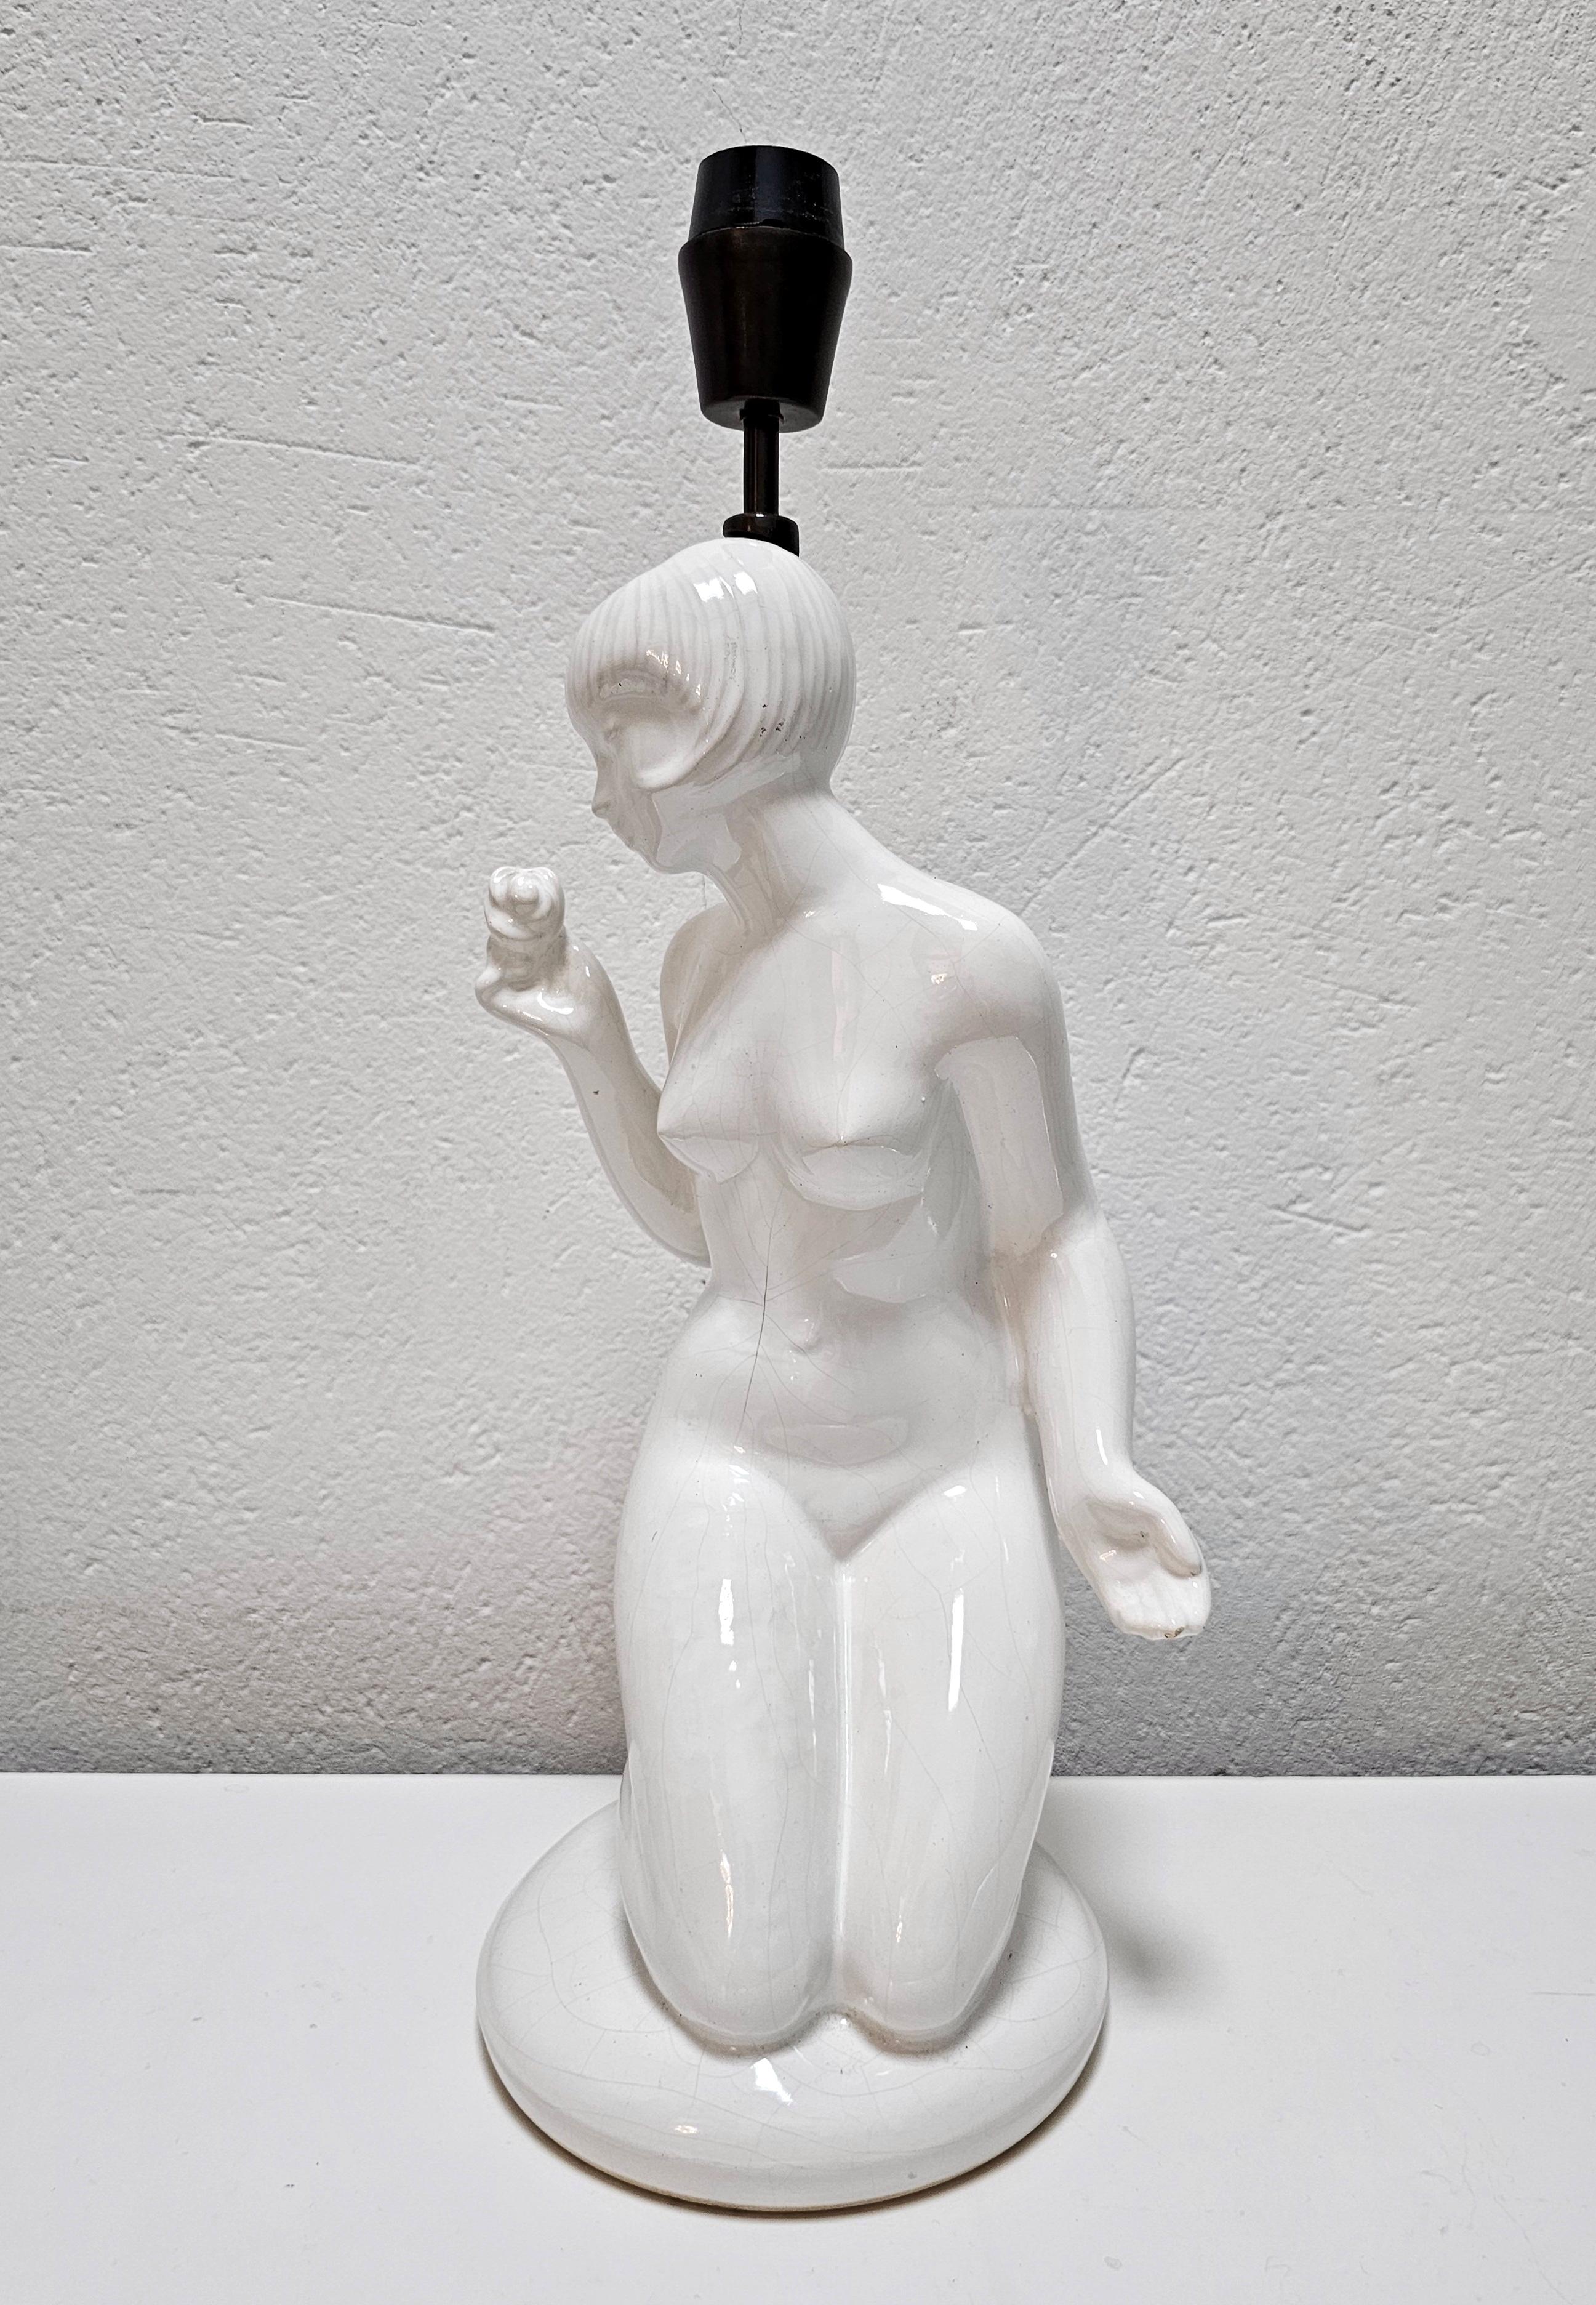 In this listing you will find a pair of white ceramic table lamps, shaped as female nudes with iconic Art Deco haircuts. Model 